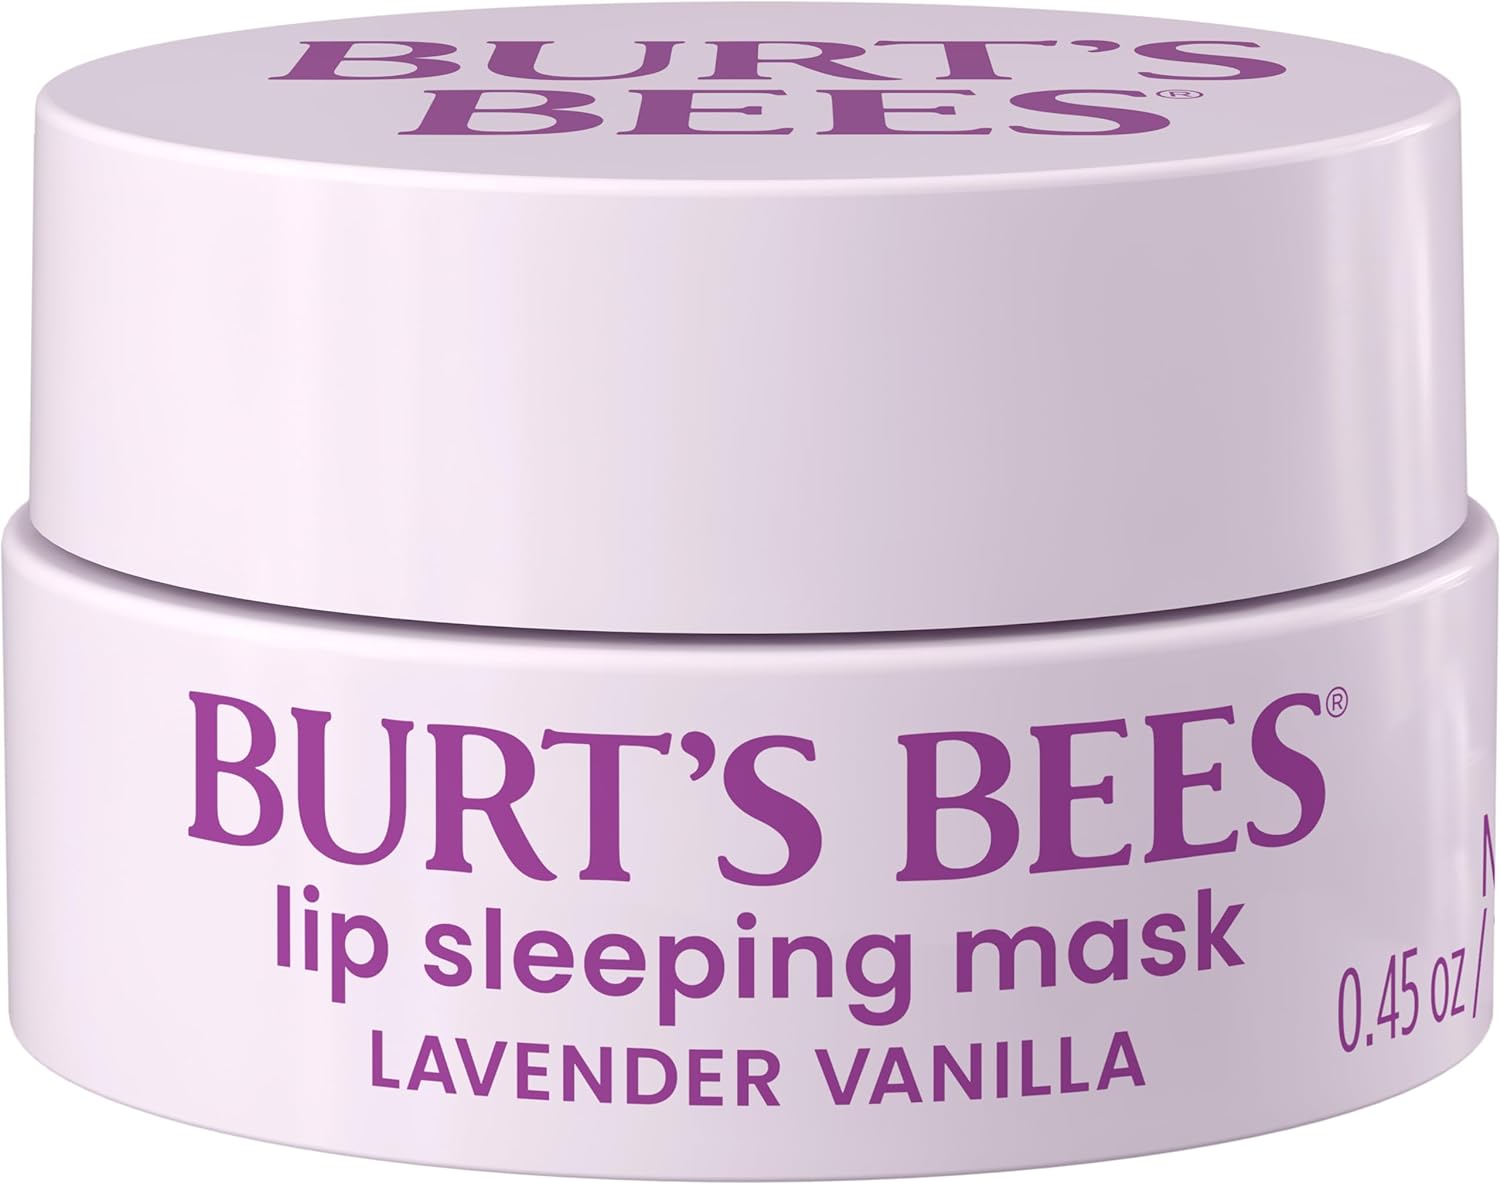 Burt’s Bees Lavender Vanilla Lip Sleeping Mask, With Hyaluronic Acid and Squalane Moisturizer To Instantly Hydrate Lips, Overnight Lip Mask, Lip Treatment, 0.45 oz